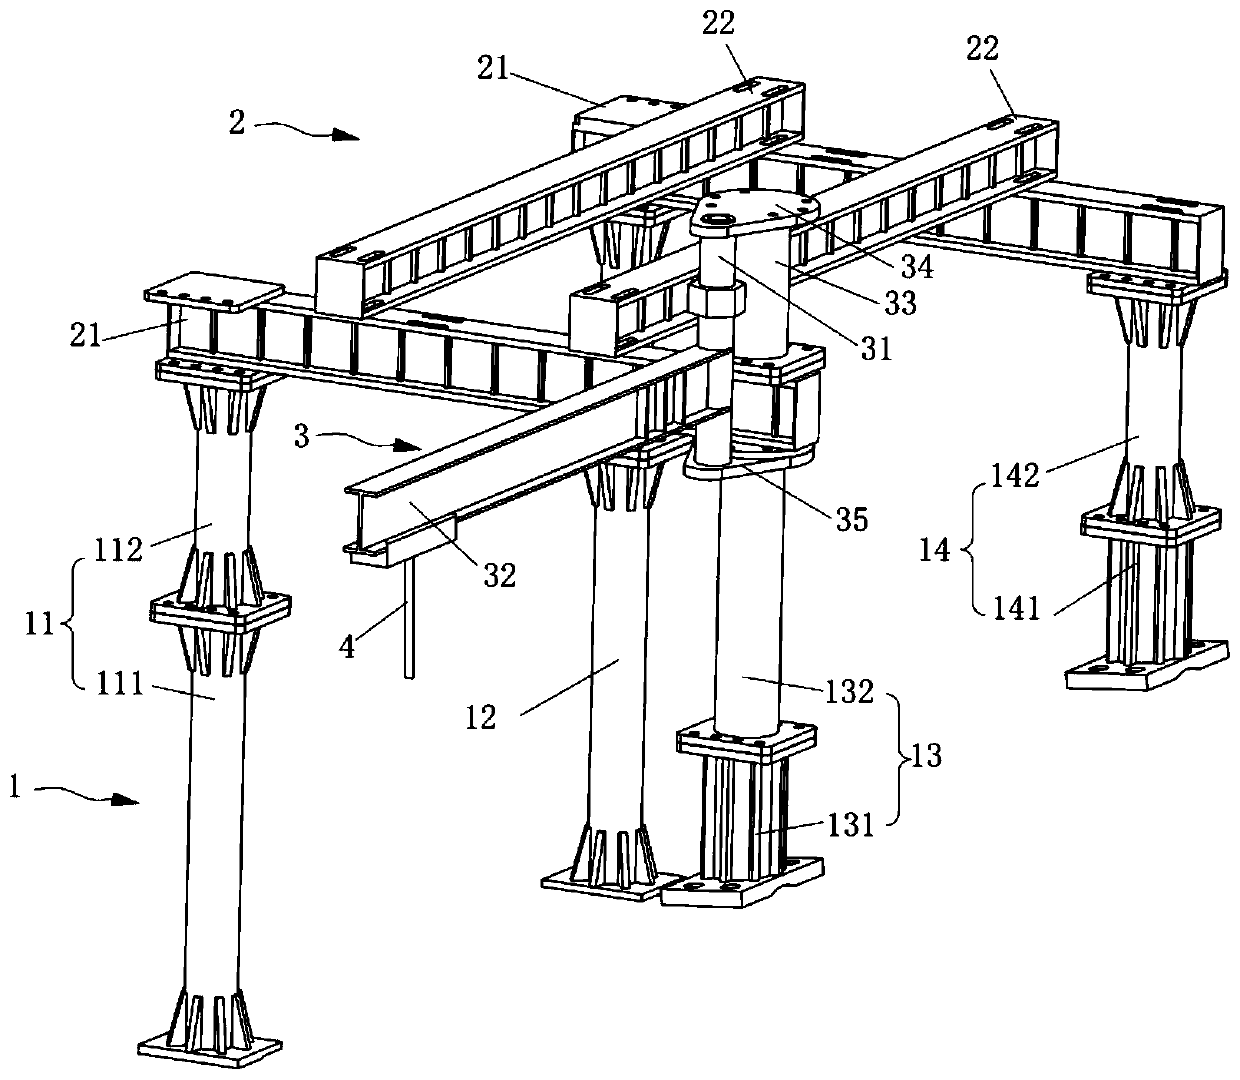 Hoisting maintenance device and wind driven generator